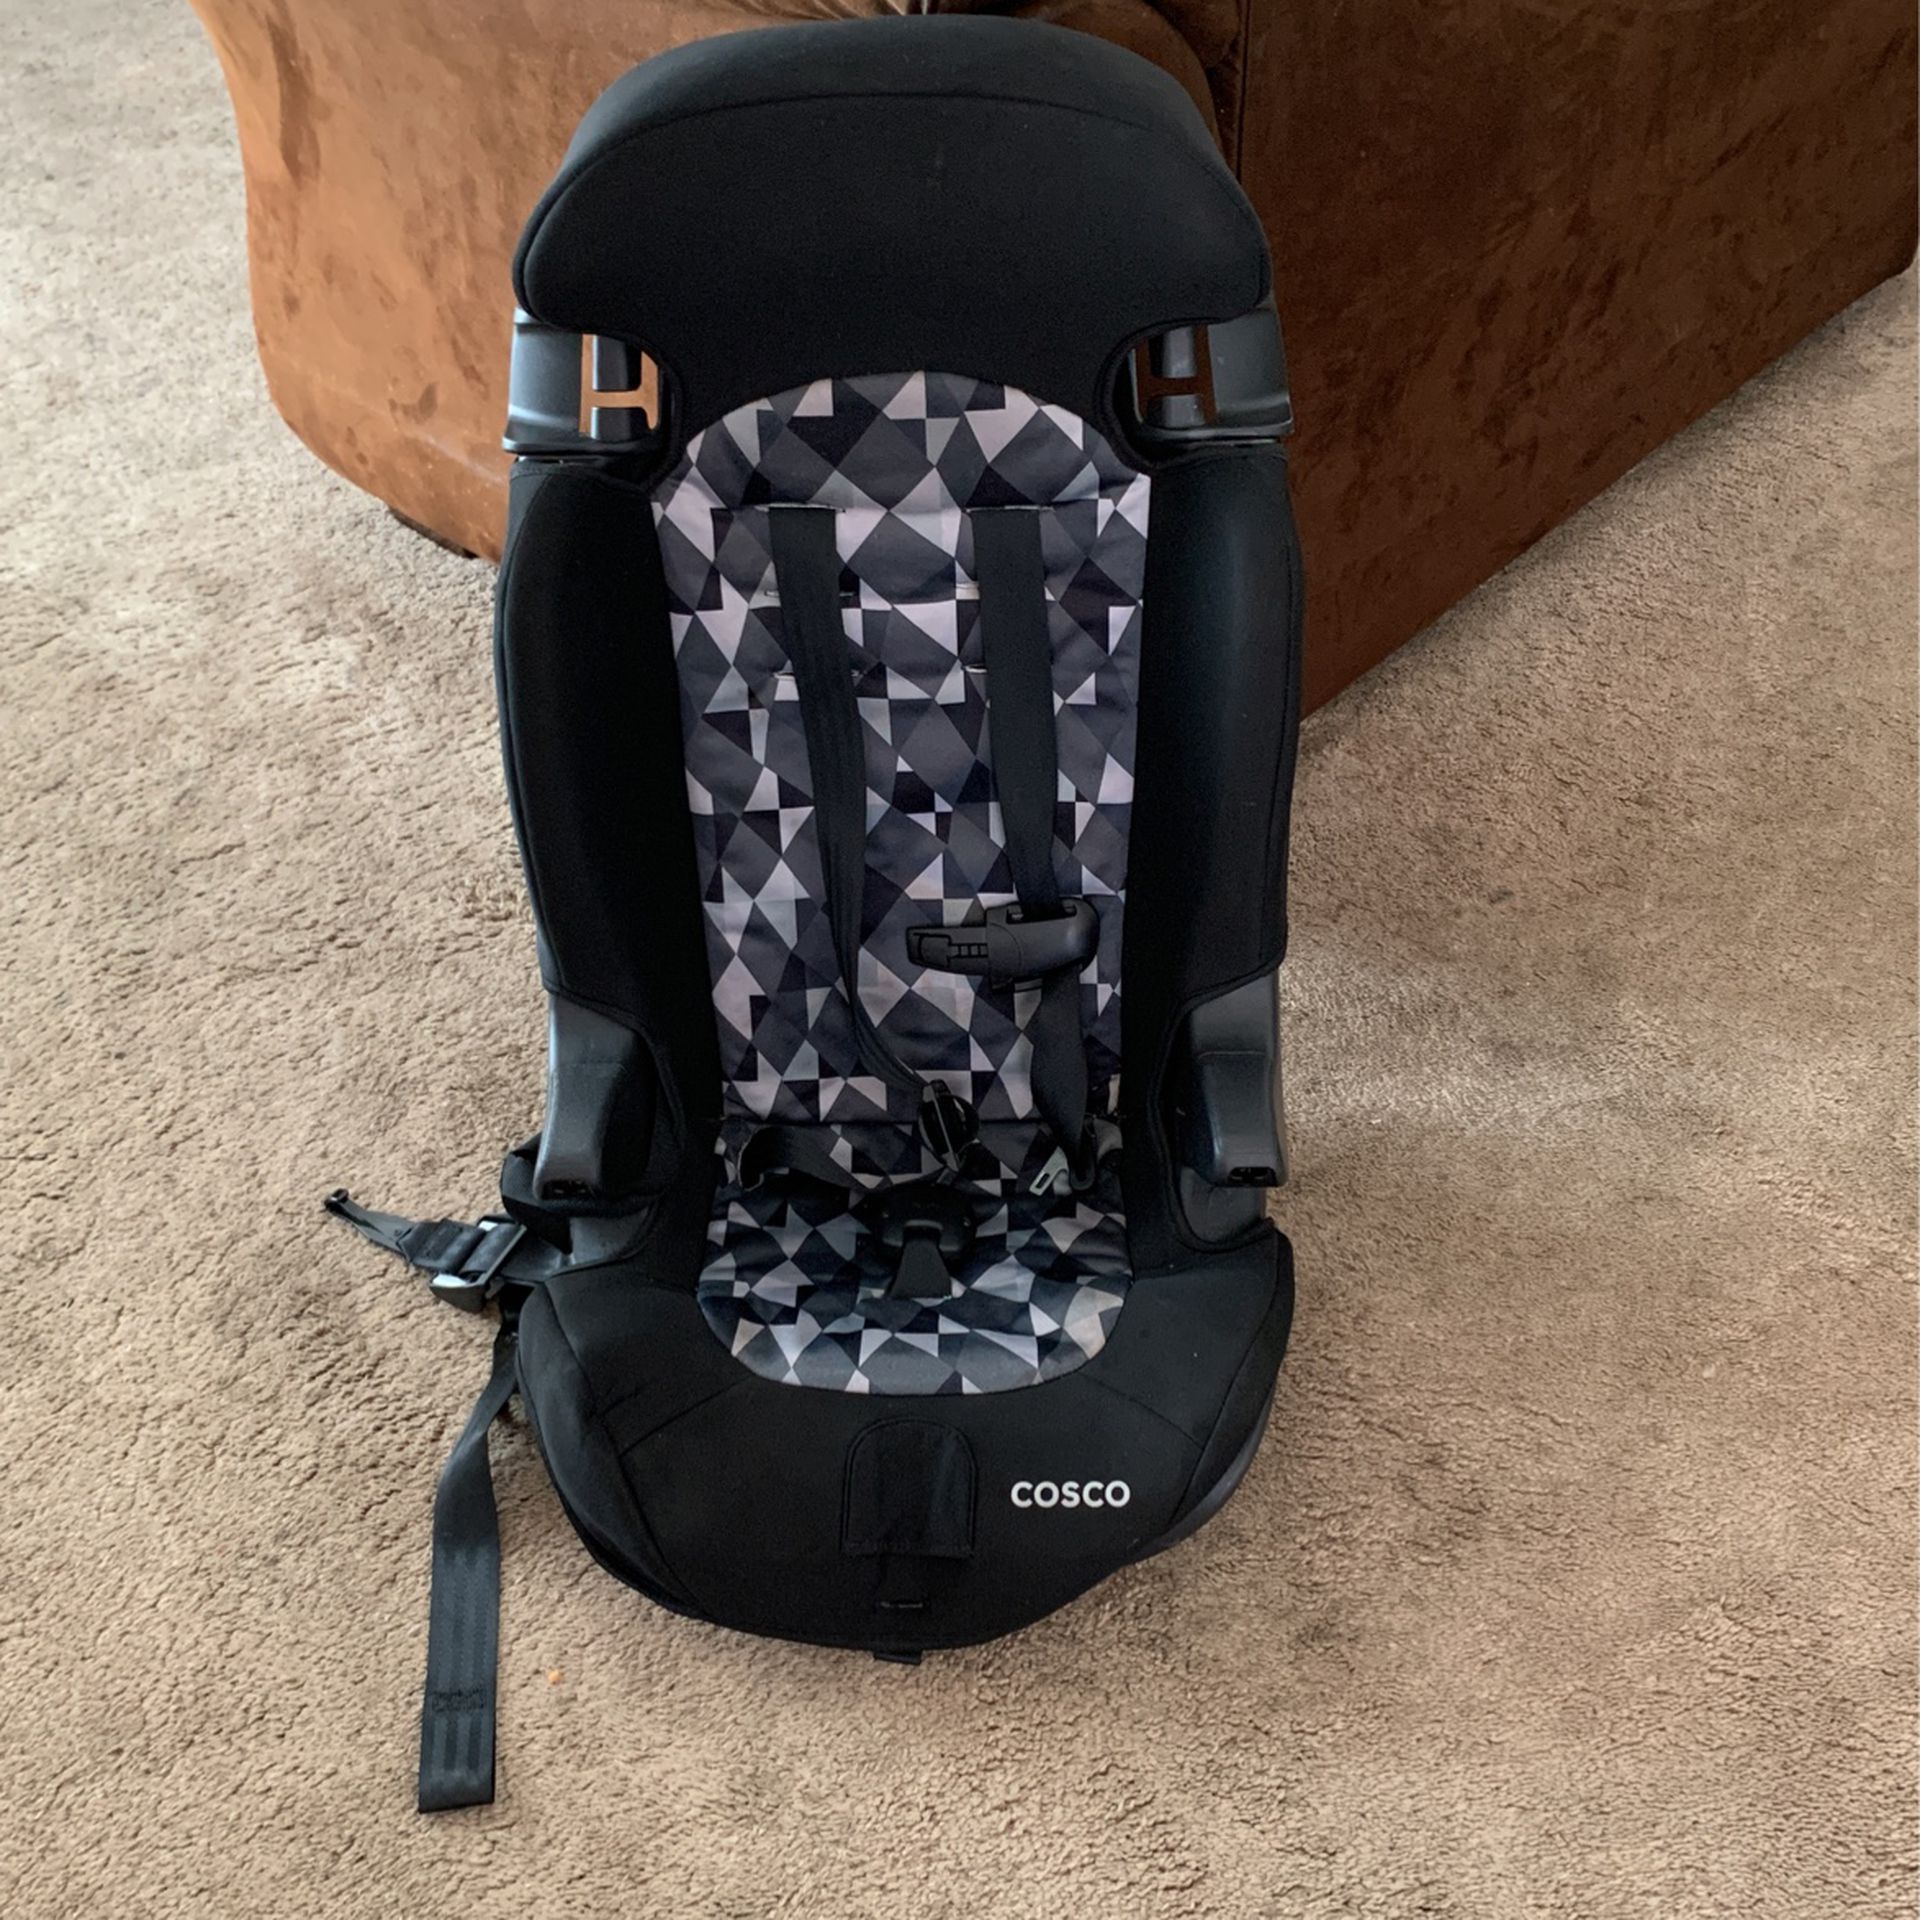 Cosco Car Seat In Great Condition 